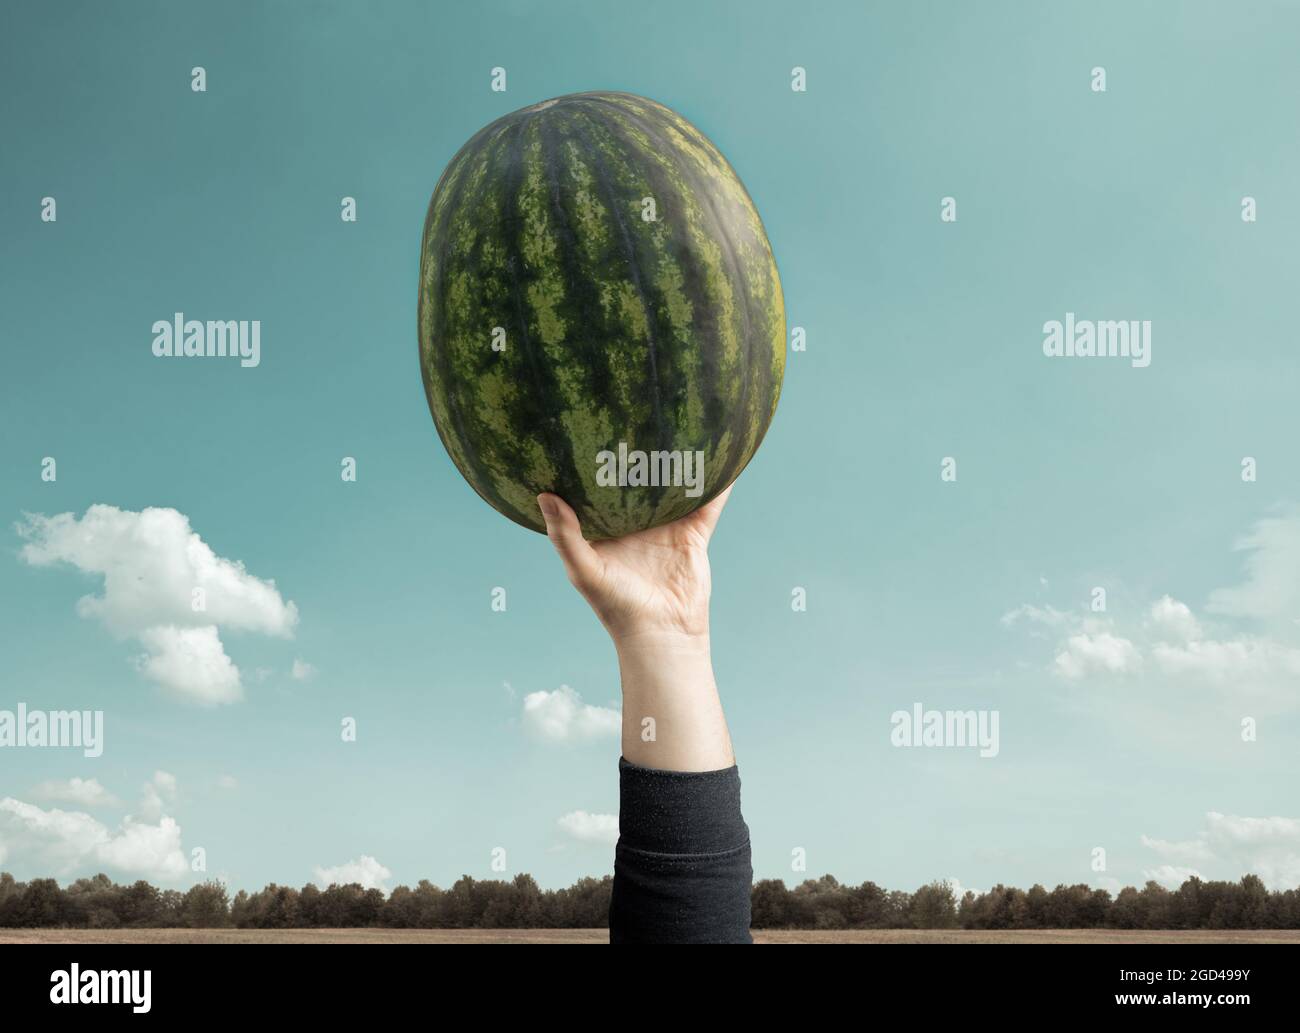 hand rise up with big watermelon in front of blue sky Stock Photo